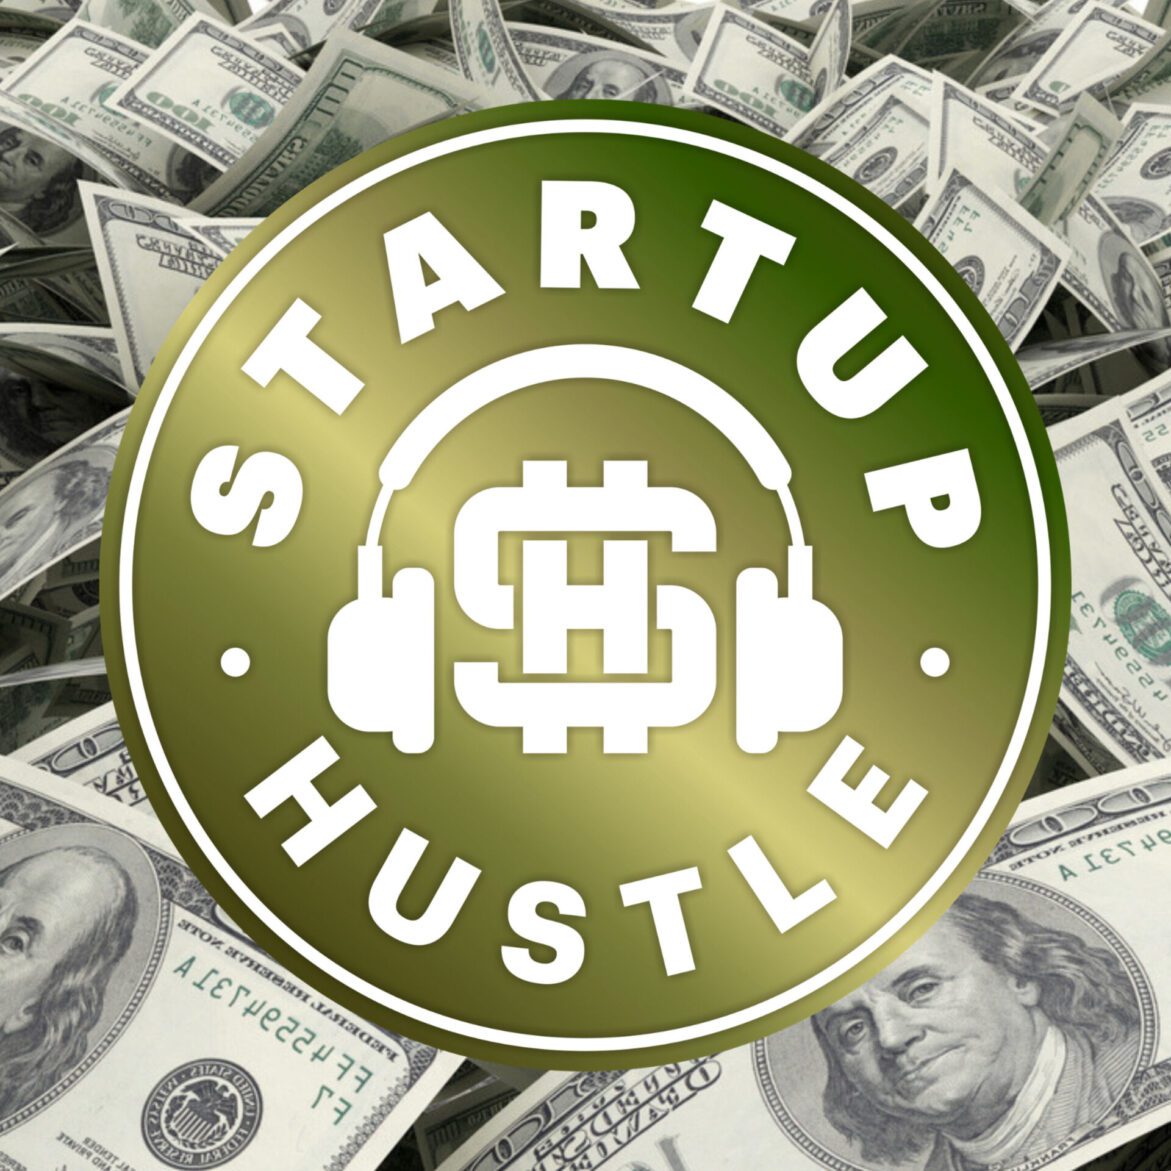 Black Podcasting - From Startup to Inc. 5000